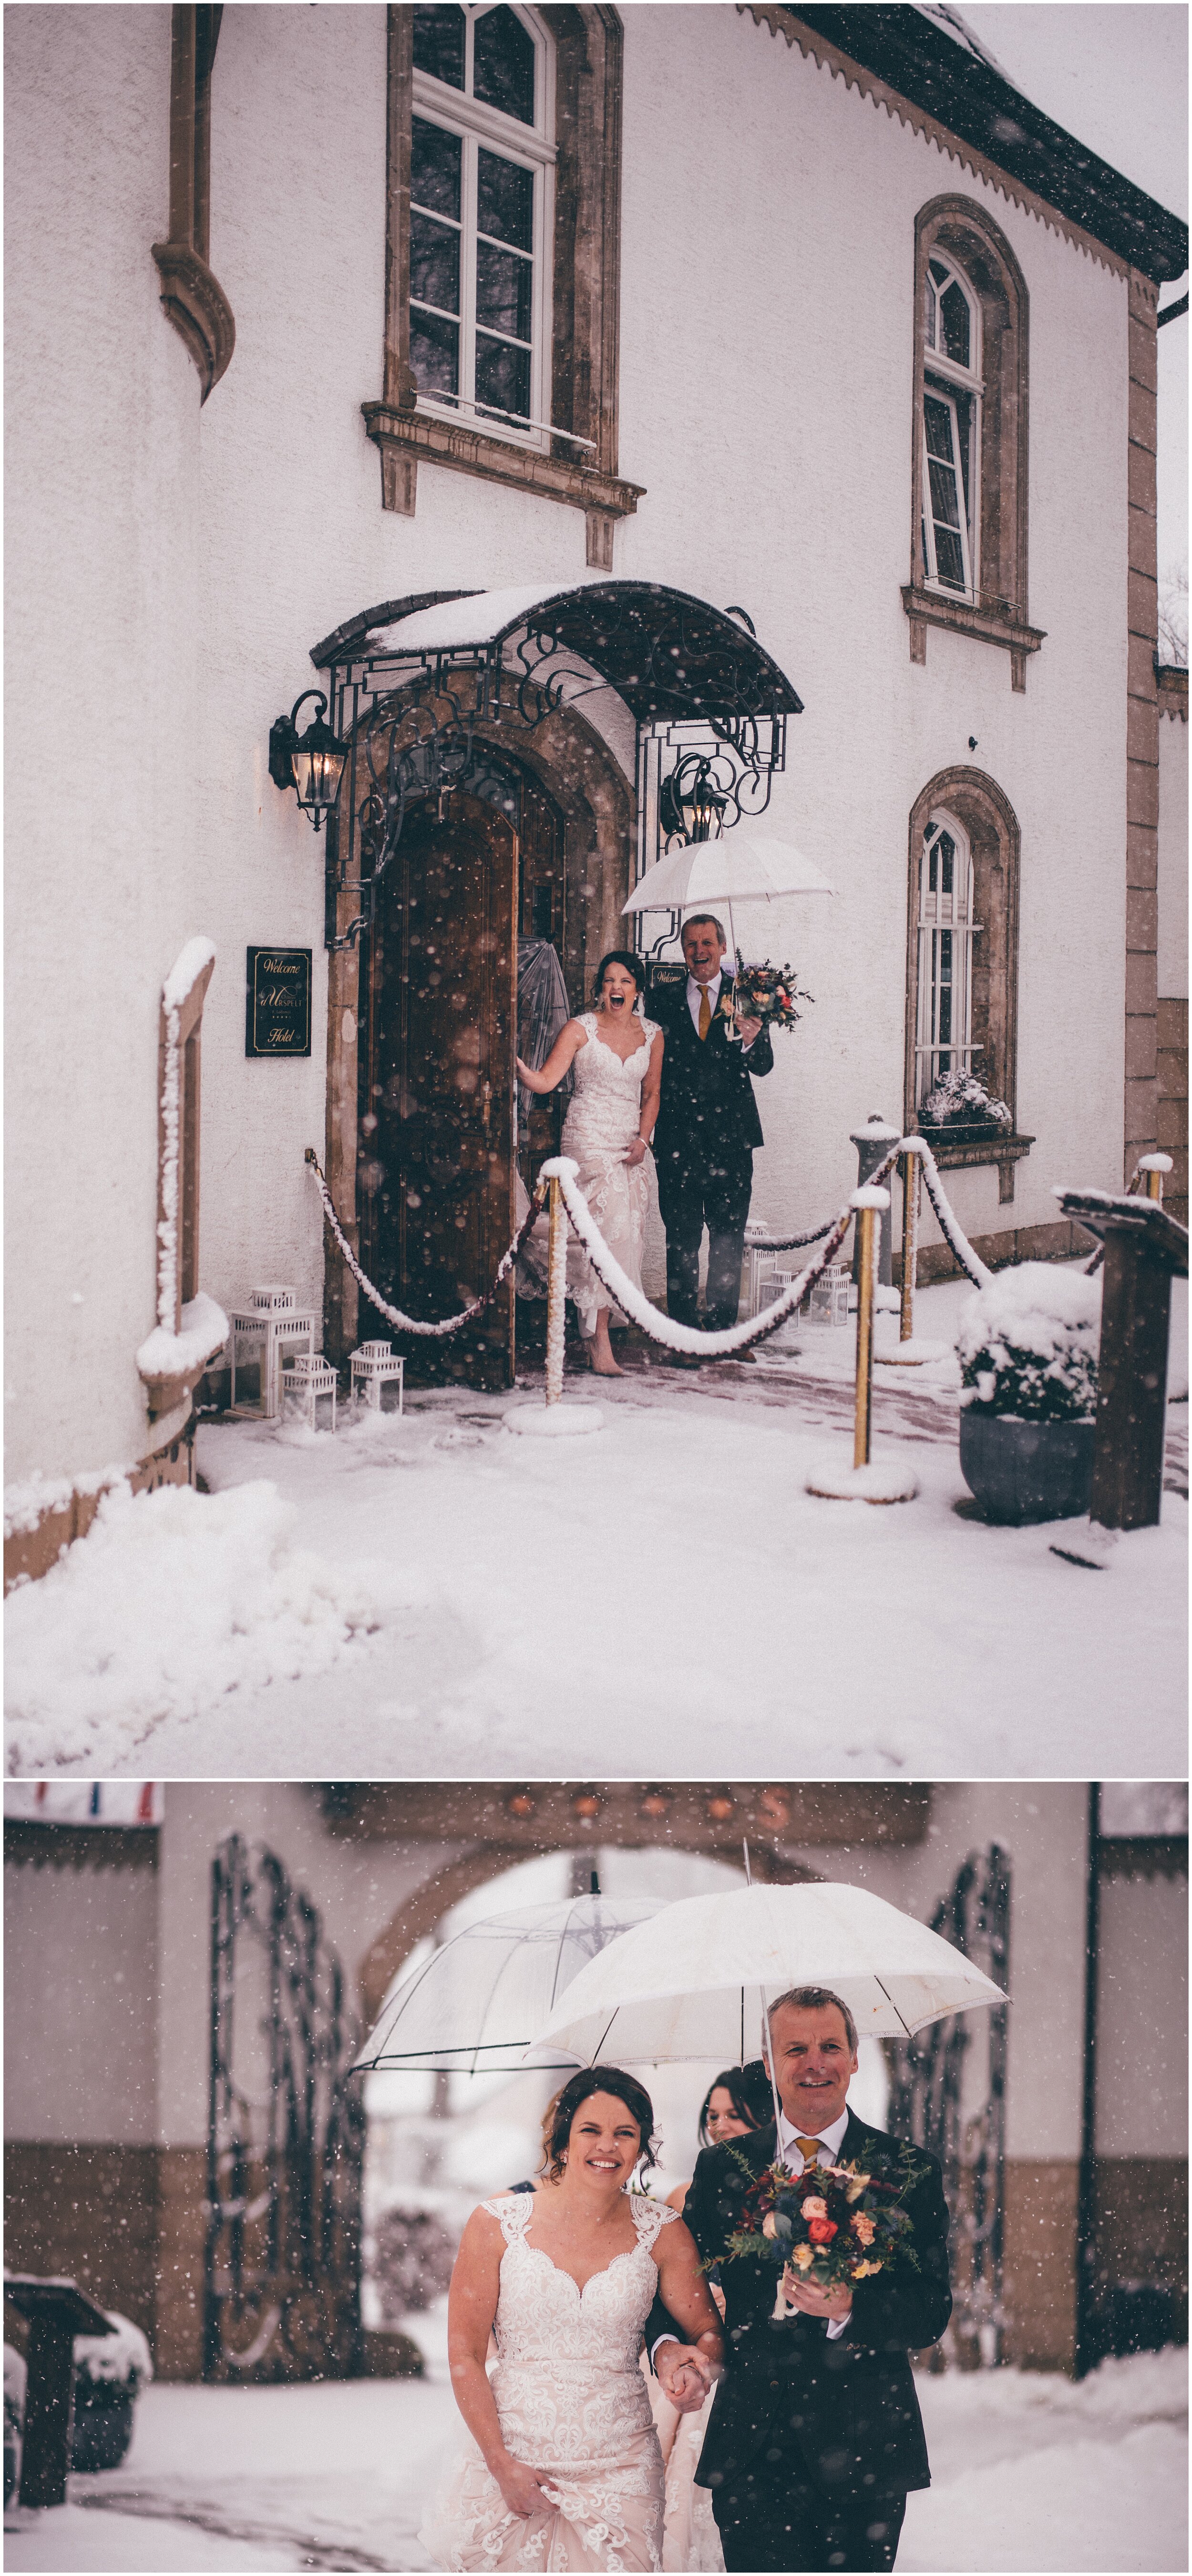 Walking to the wedding ceremony through the snow in Luxembourg.